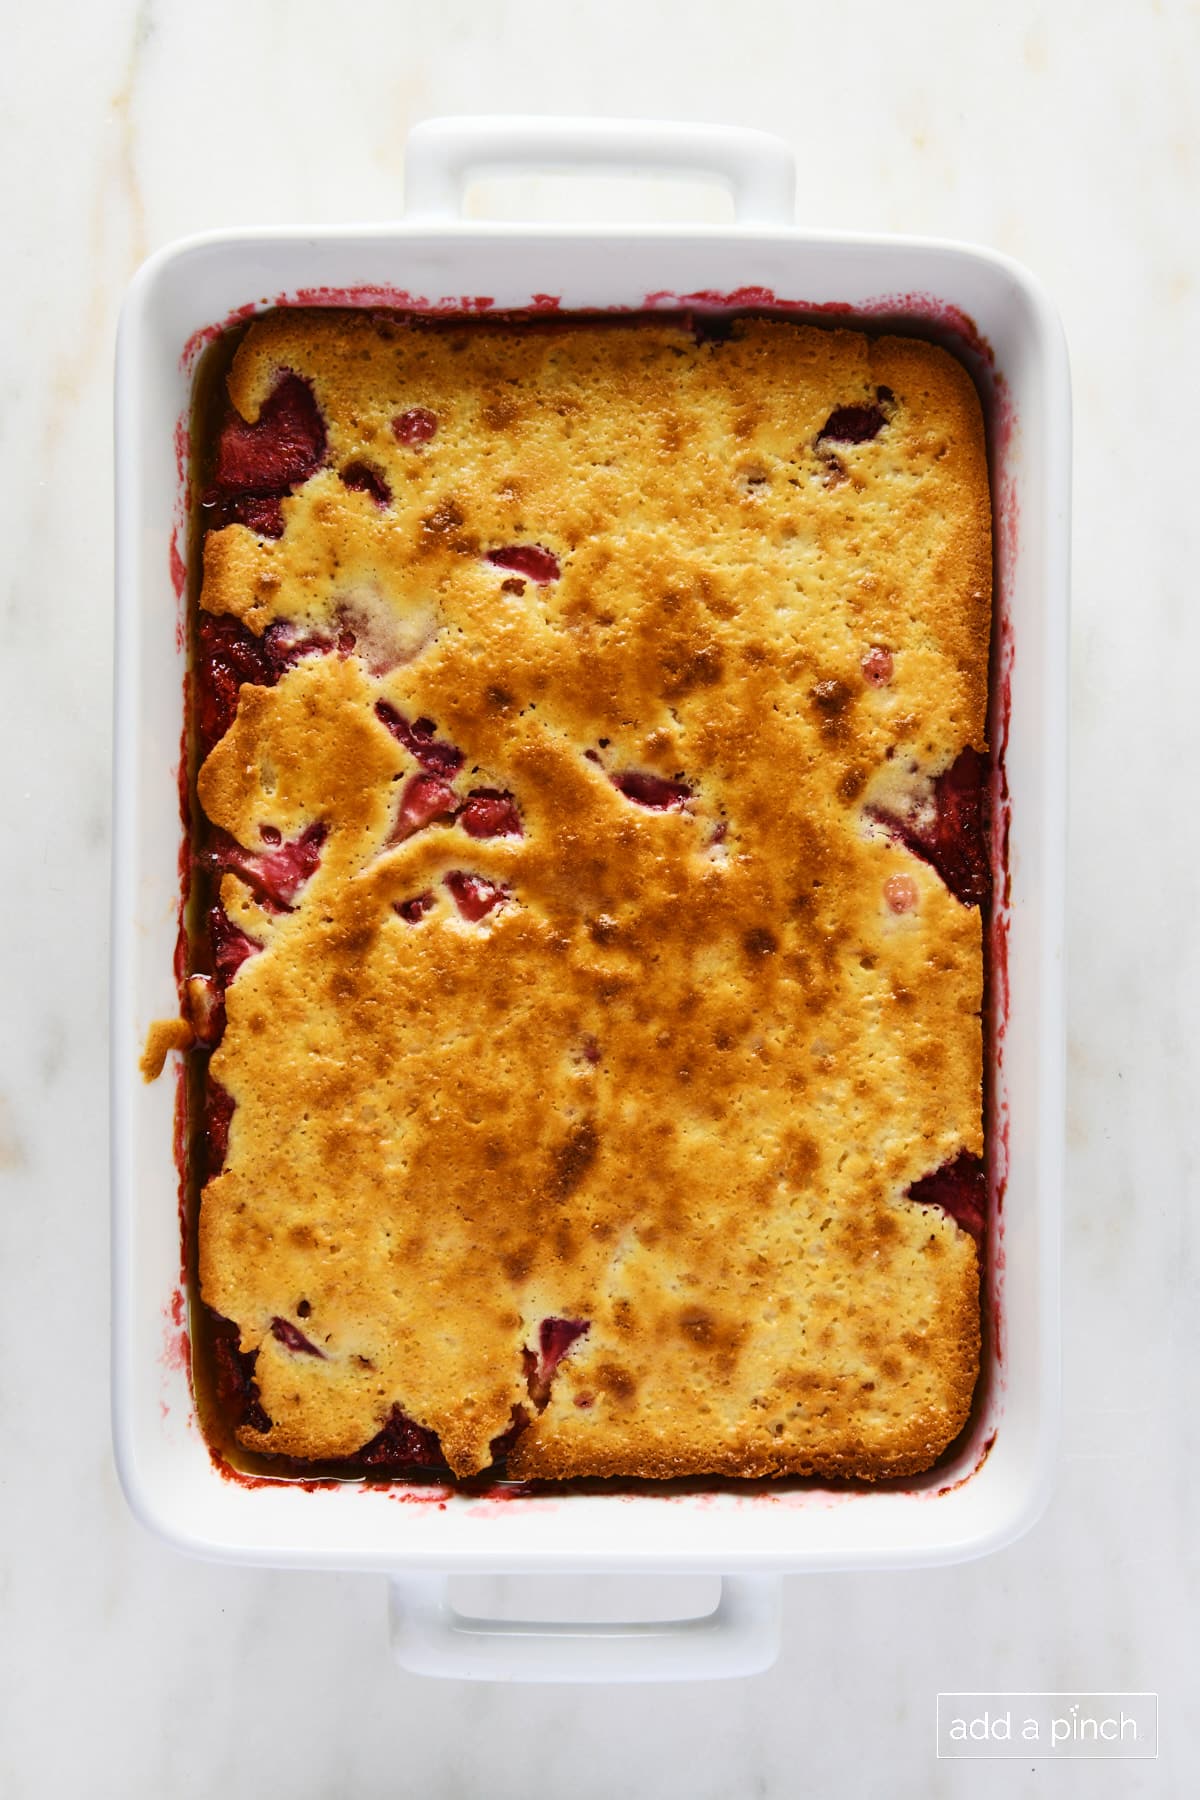 Baked strawberry cobbler in a white baking dish